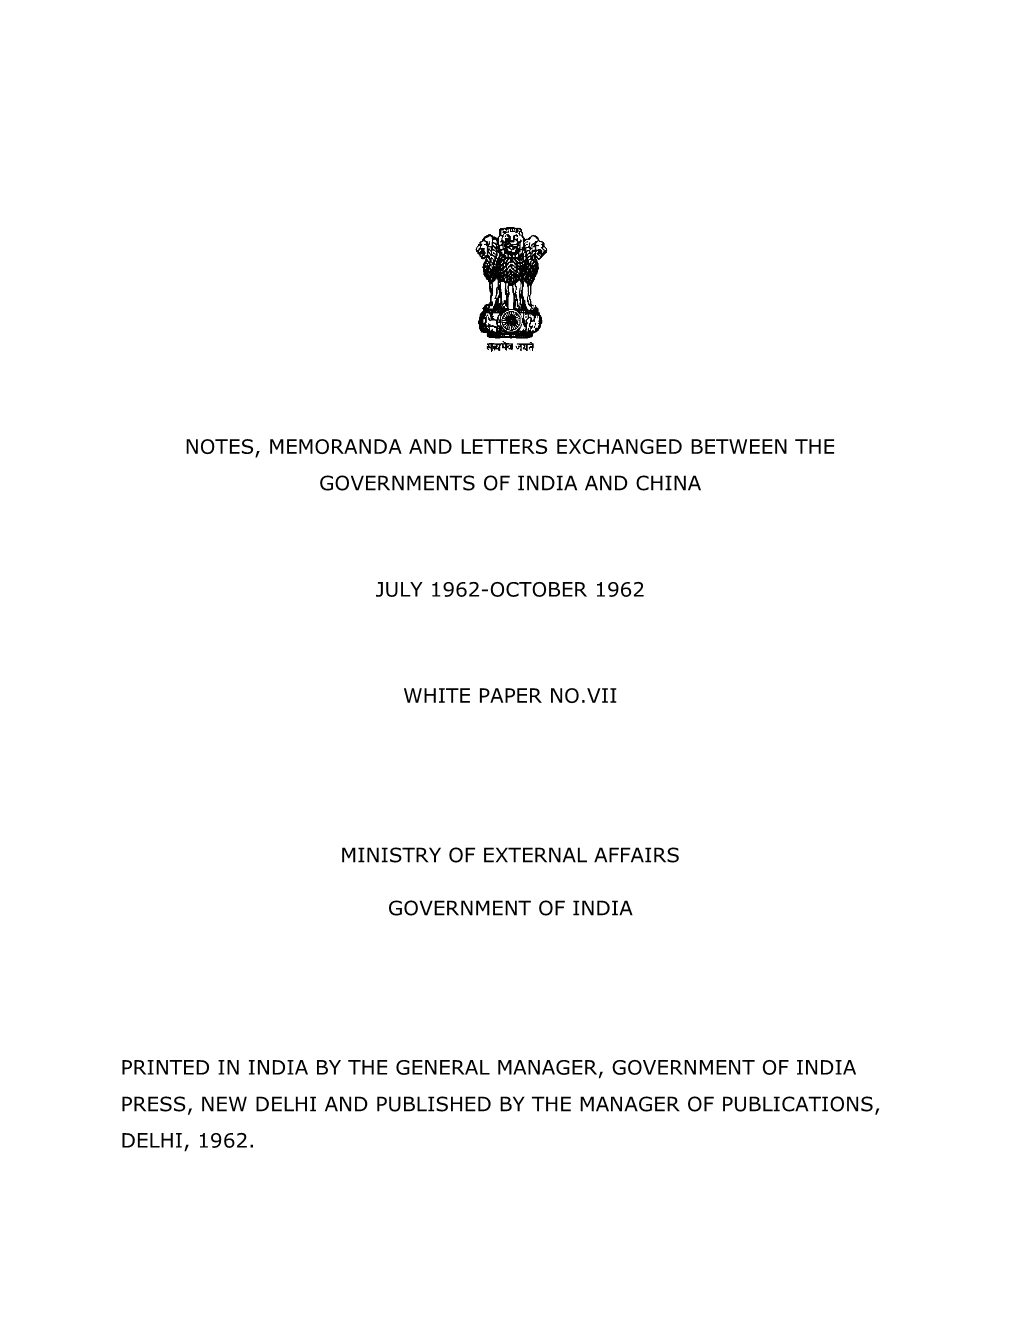 Notes, Memoranda and Letters Exchanged Between the Governments of India and China